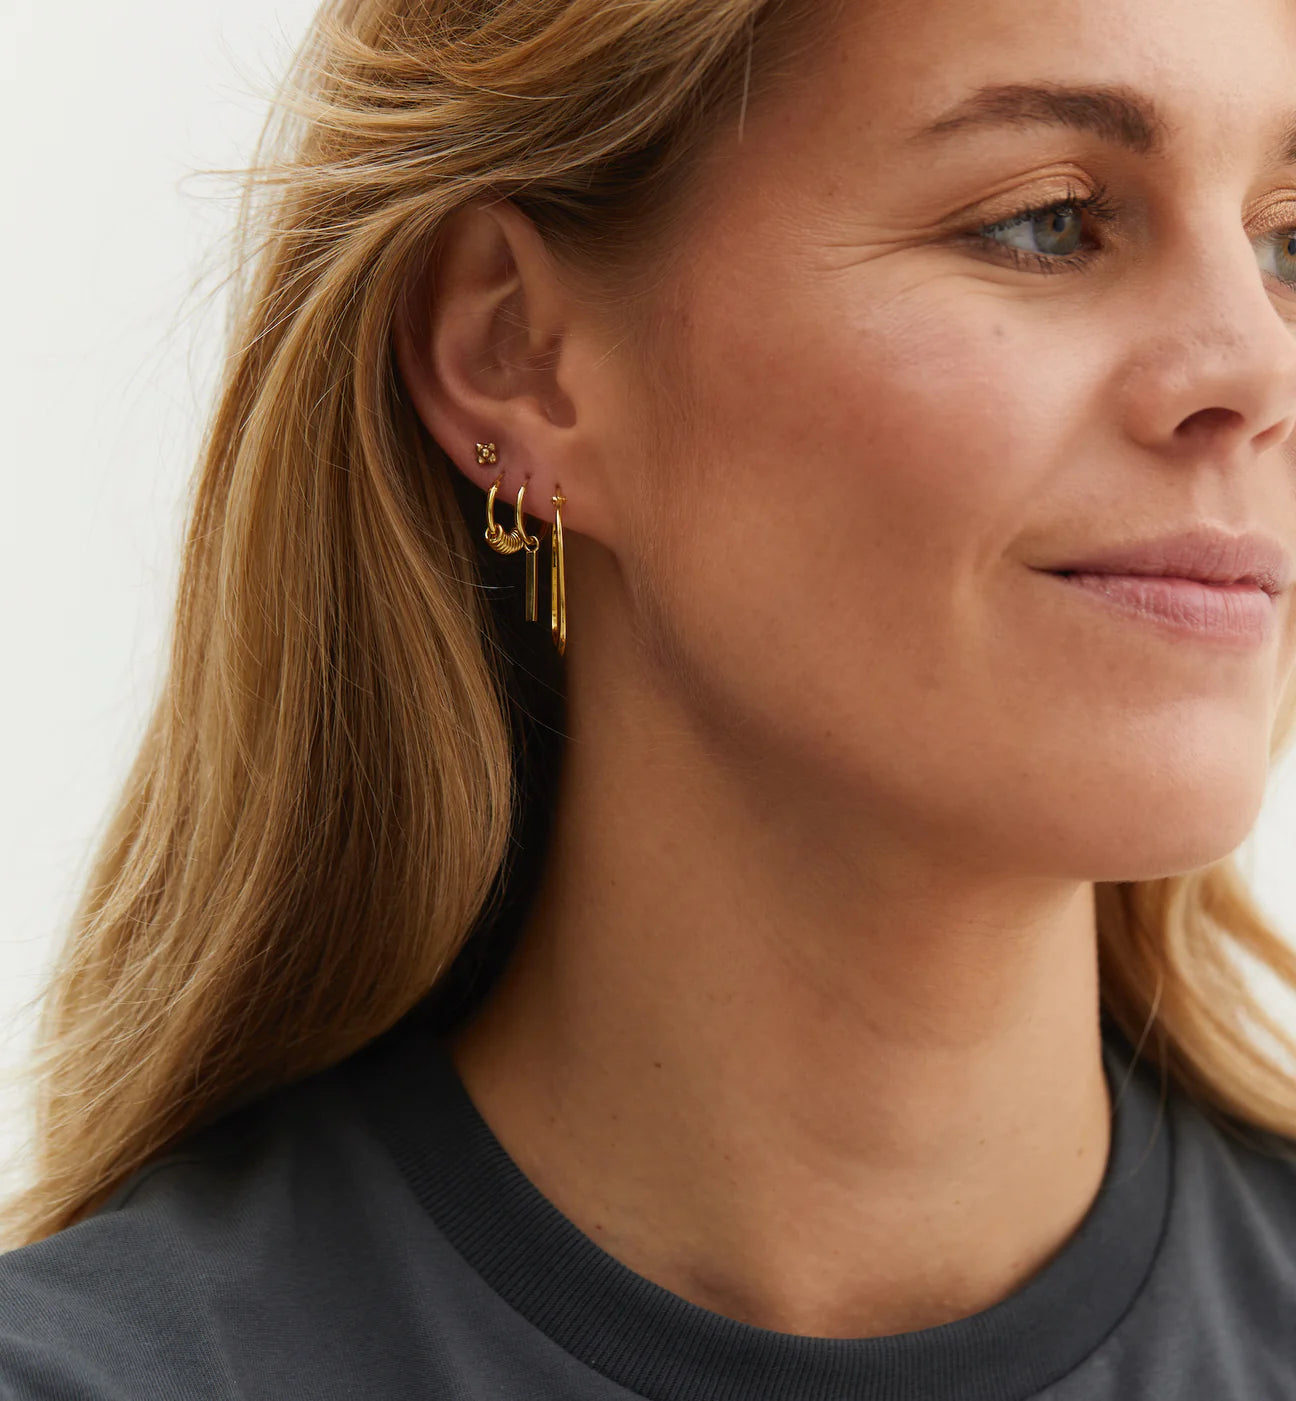 The Anna + Nina Link Hoop Earrings - Goldplated, with their distinct geometric shape, adorn the ears of a woman casually dressed in a t-shirt.